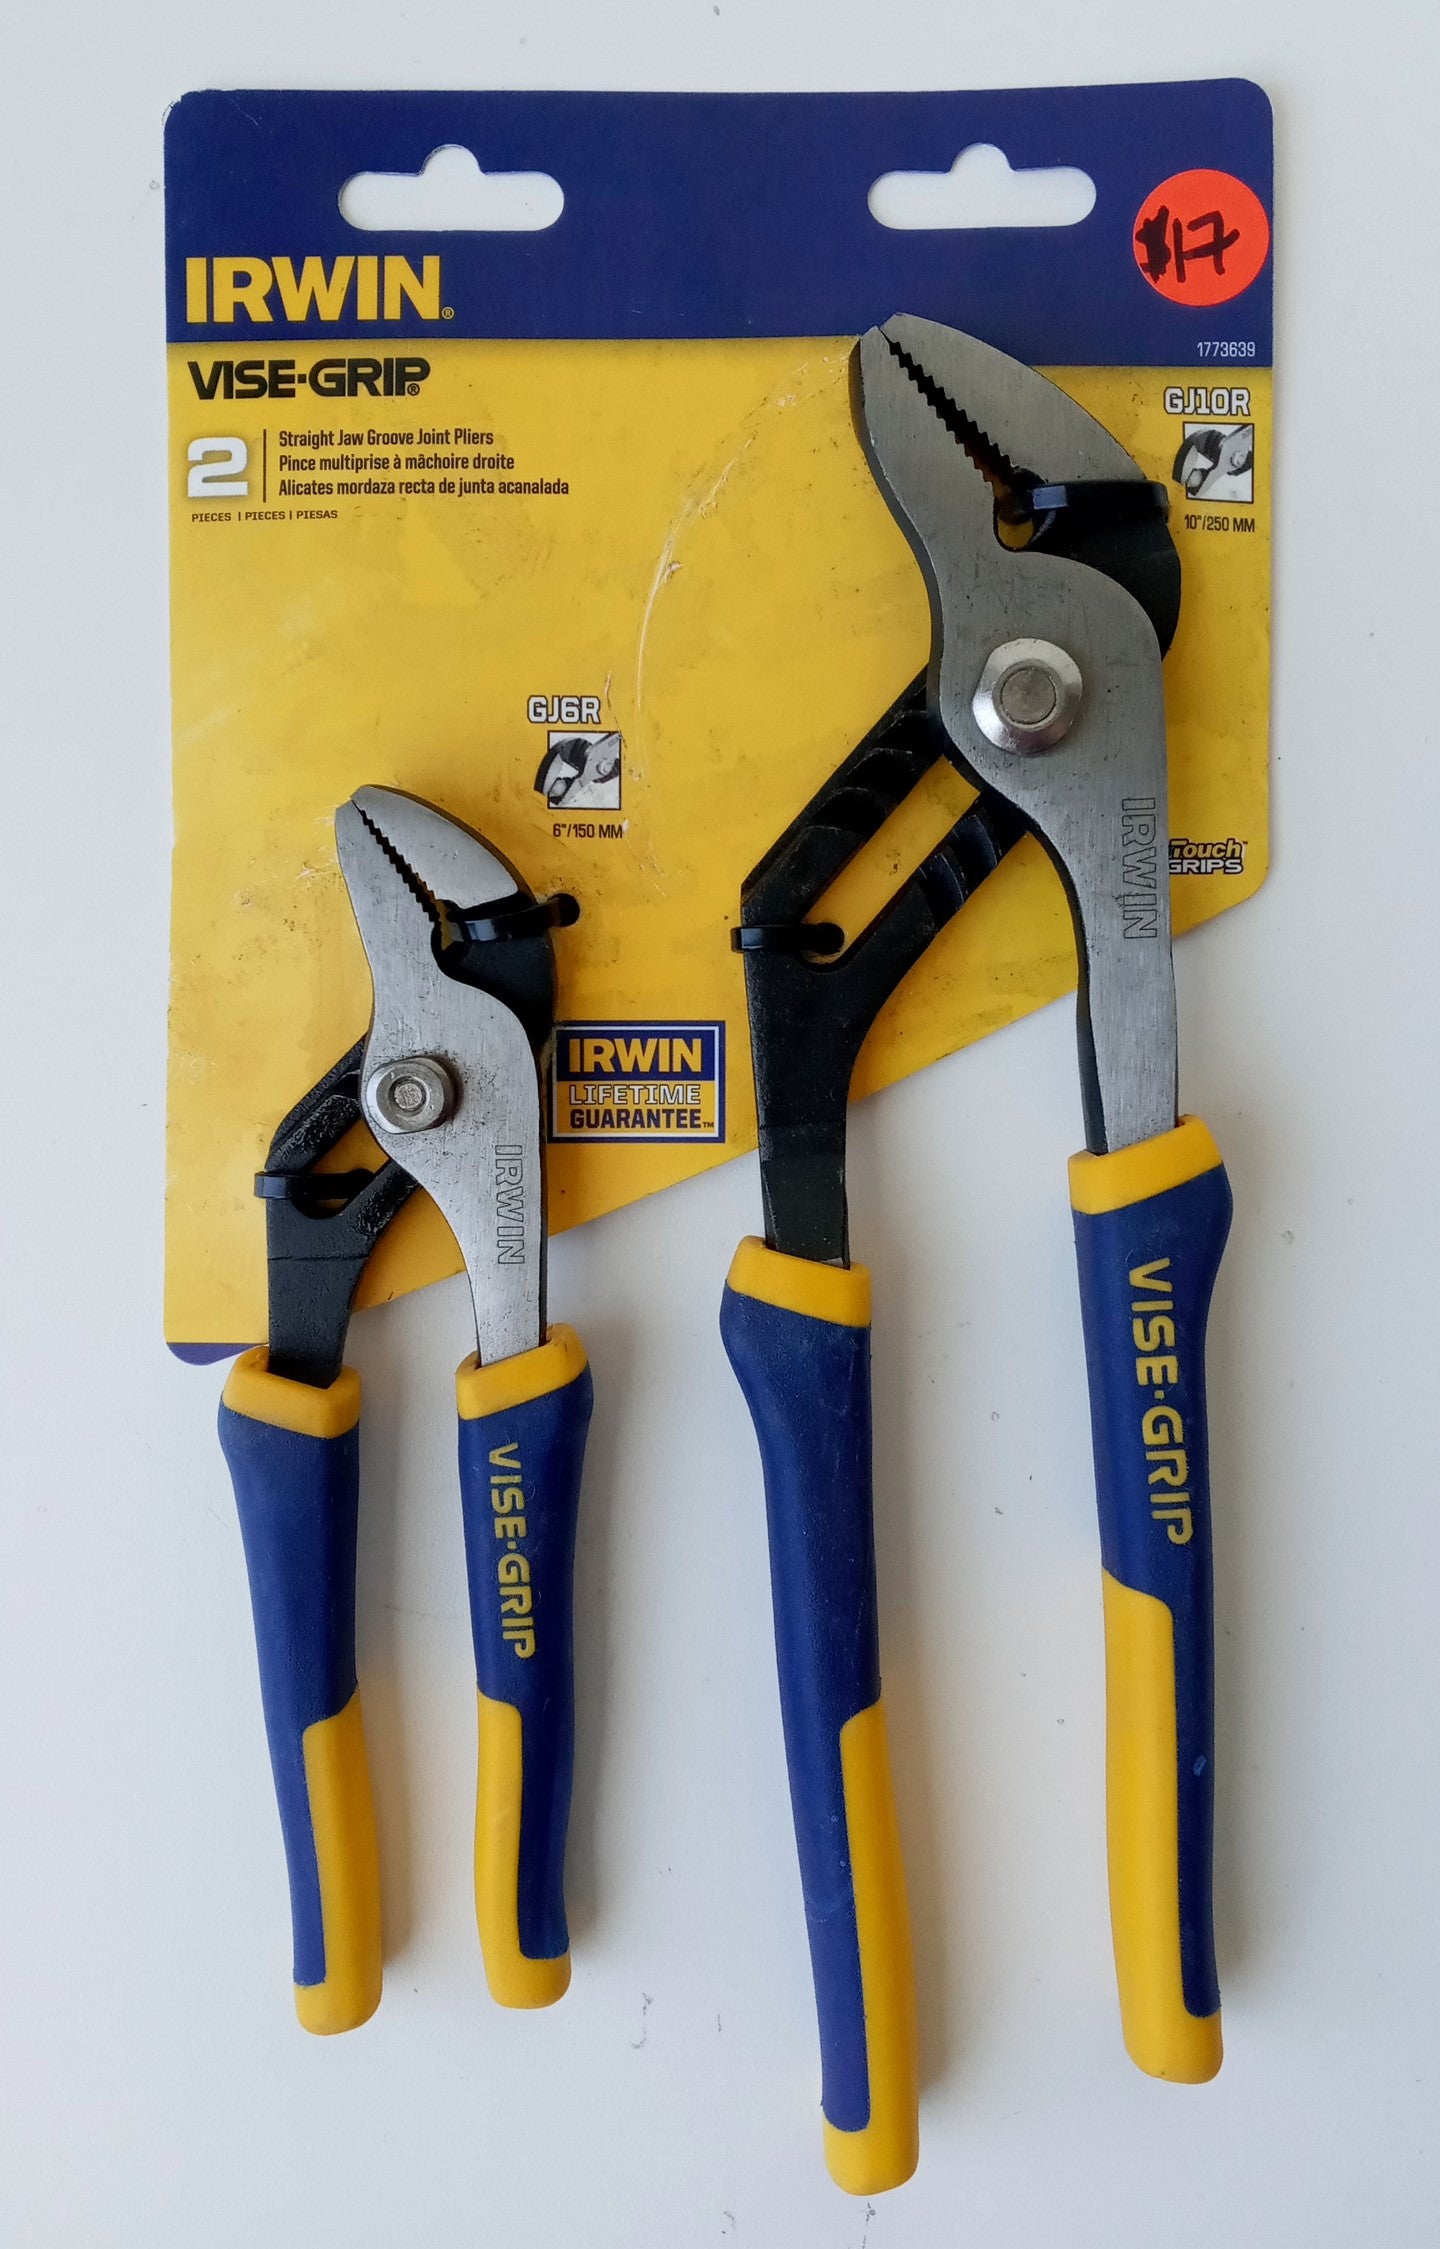 Irwin 1773639 Vise-Grip Straight Jaws Groove Joint Pliers 2pc Set 6" & 10"